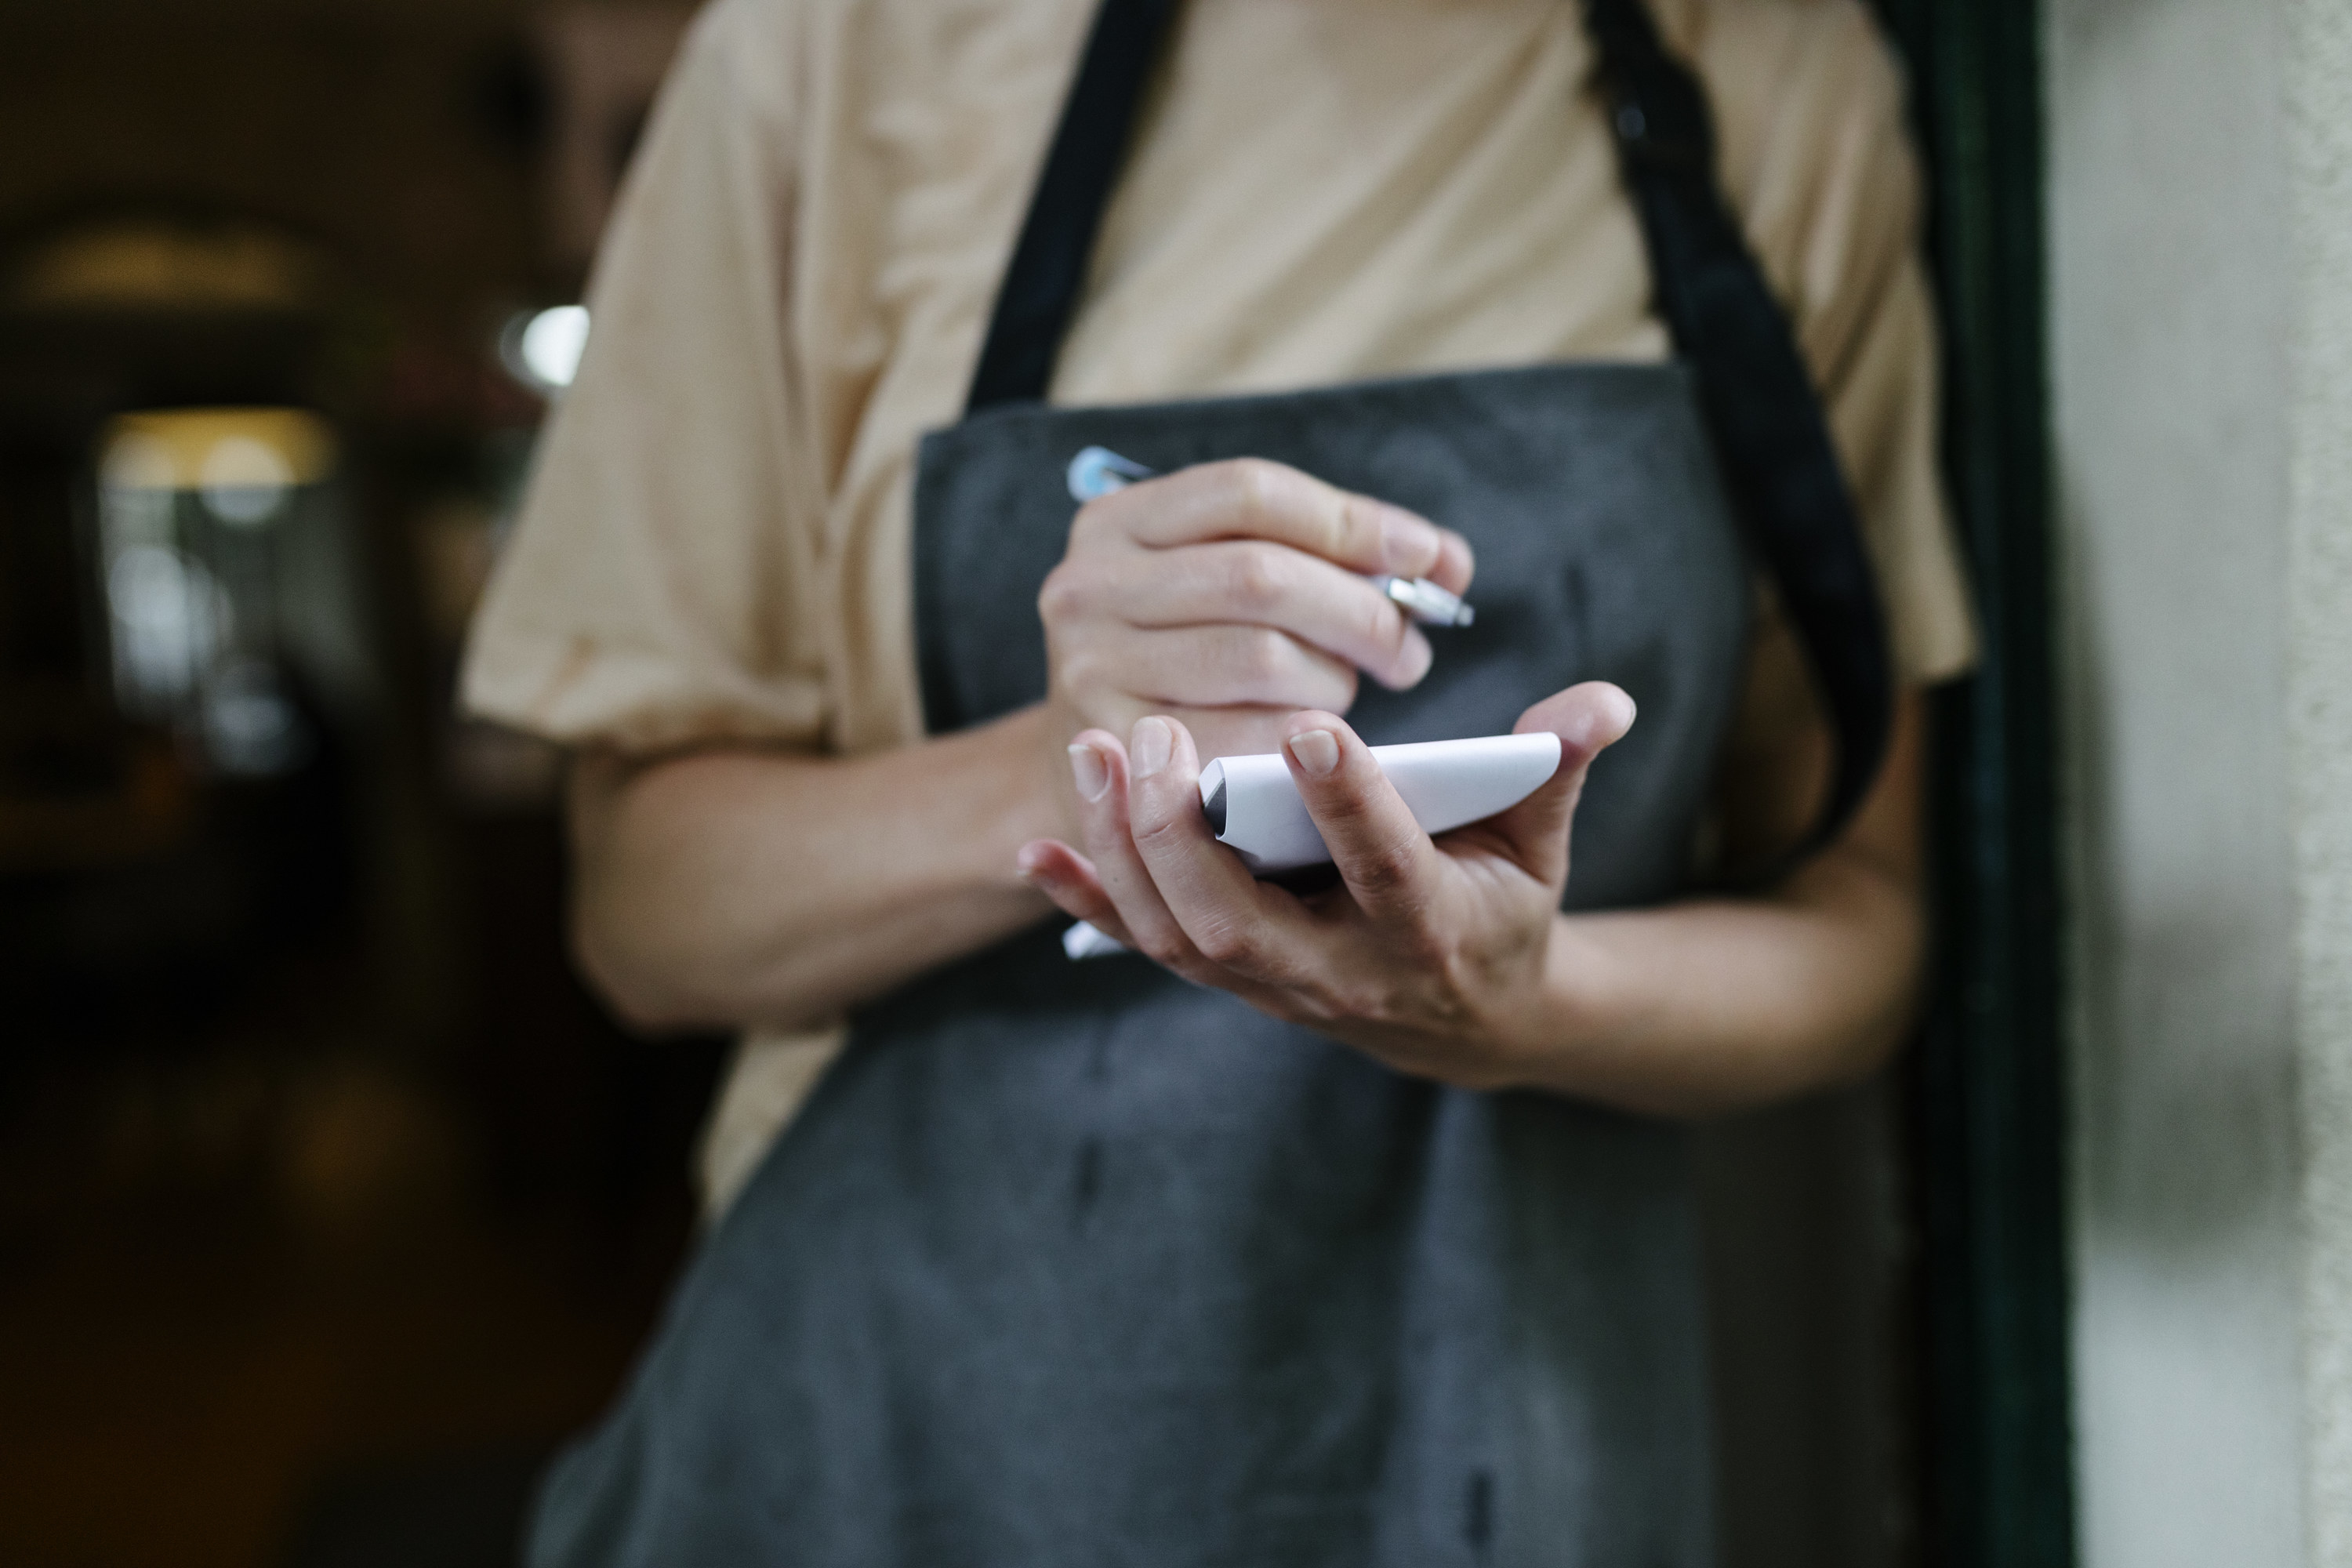 A waiter taking an order on a pad